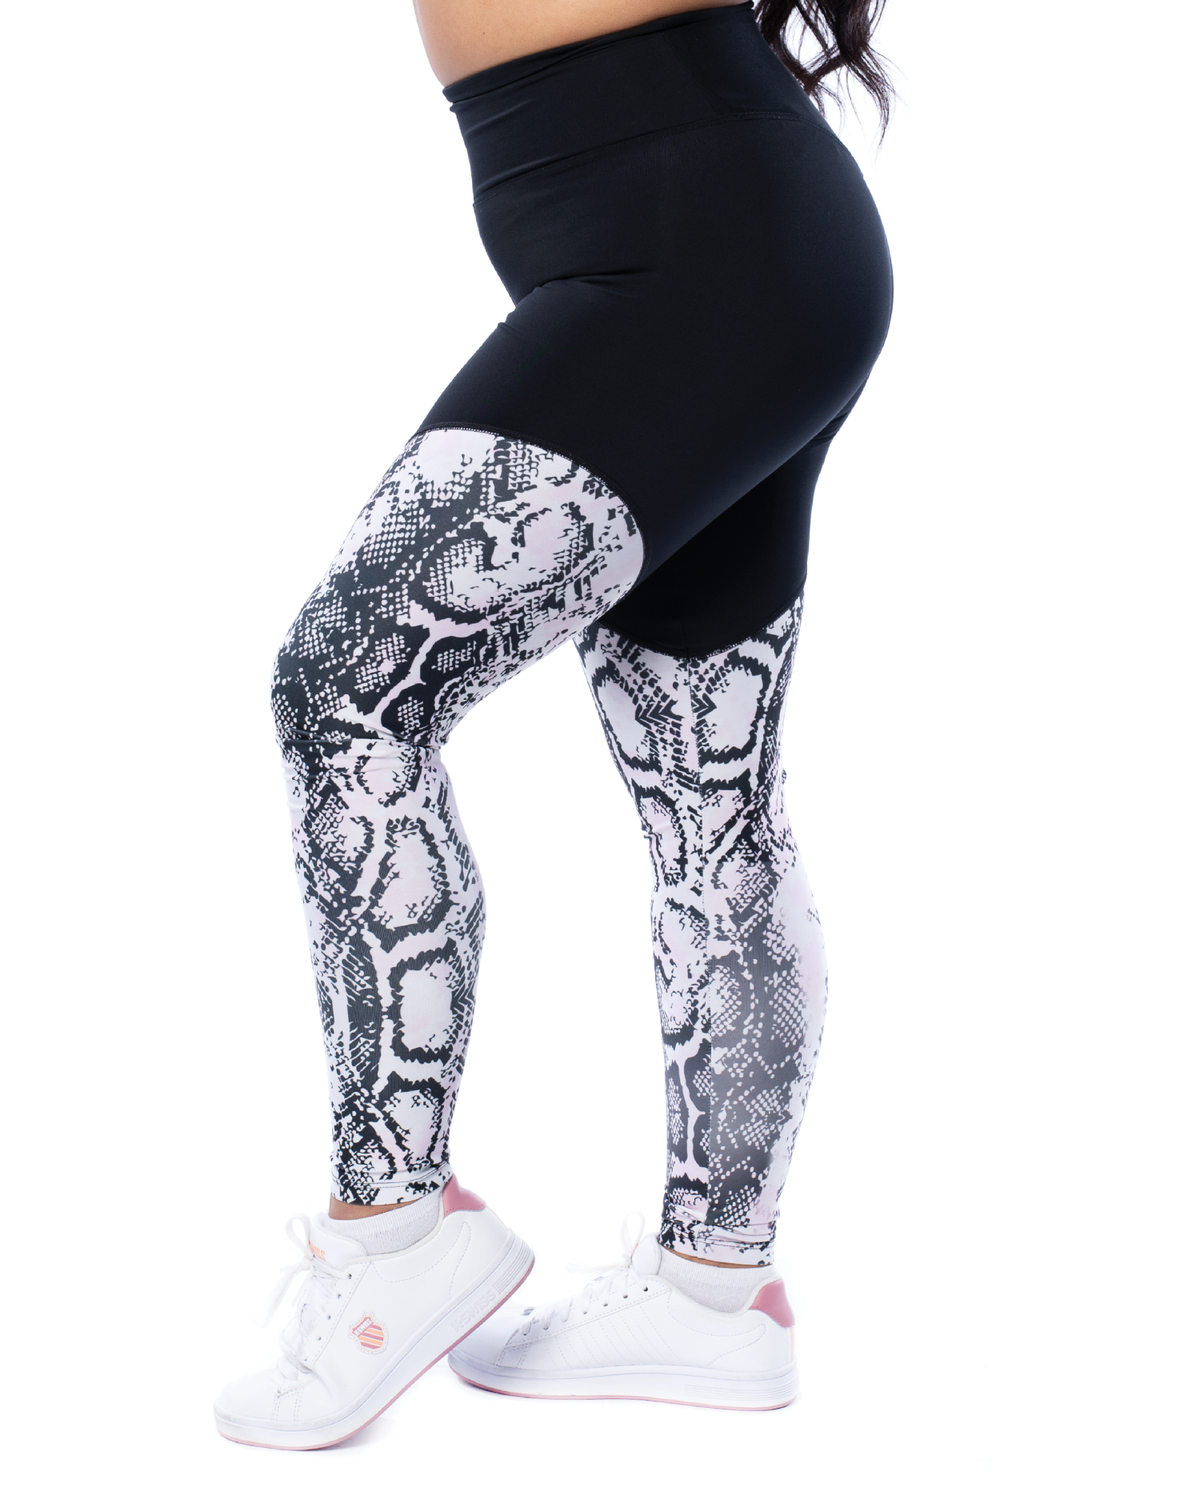 snake pattern compression leggings with black top part